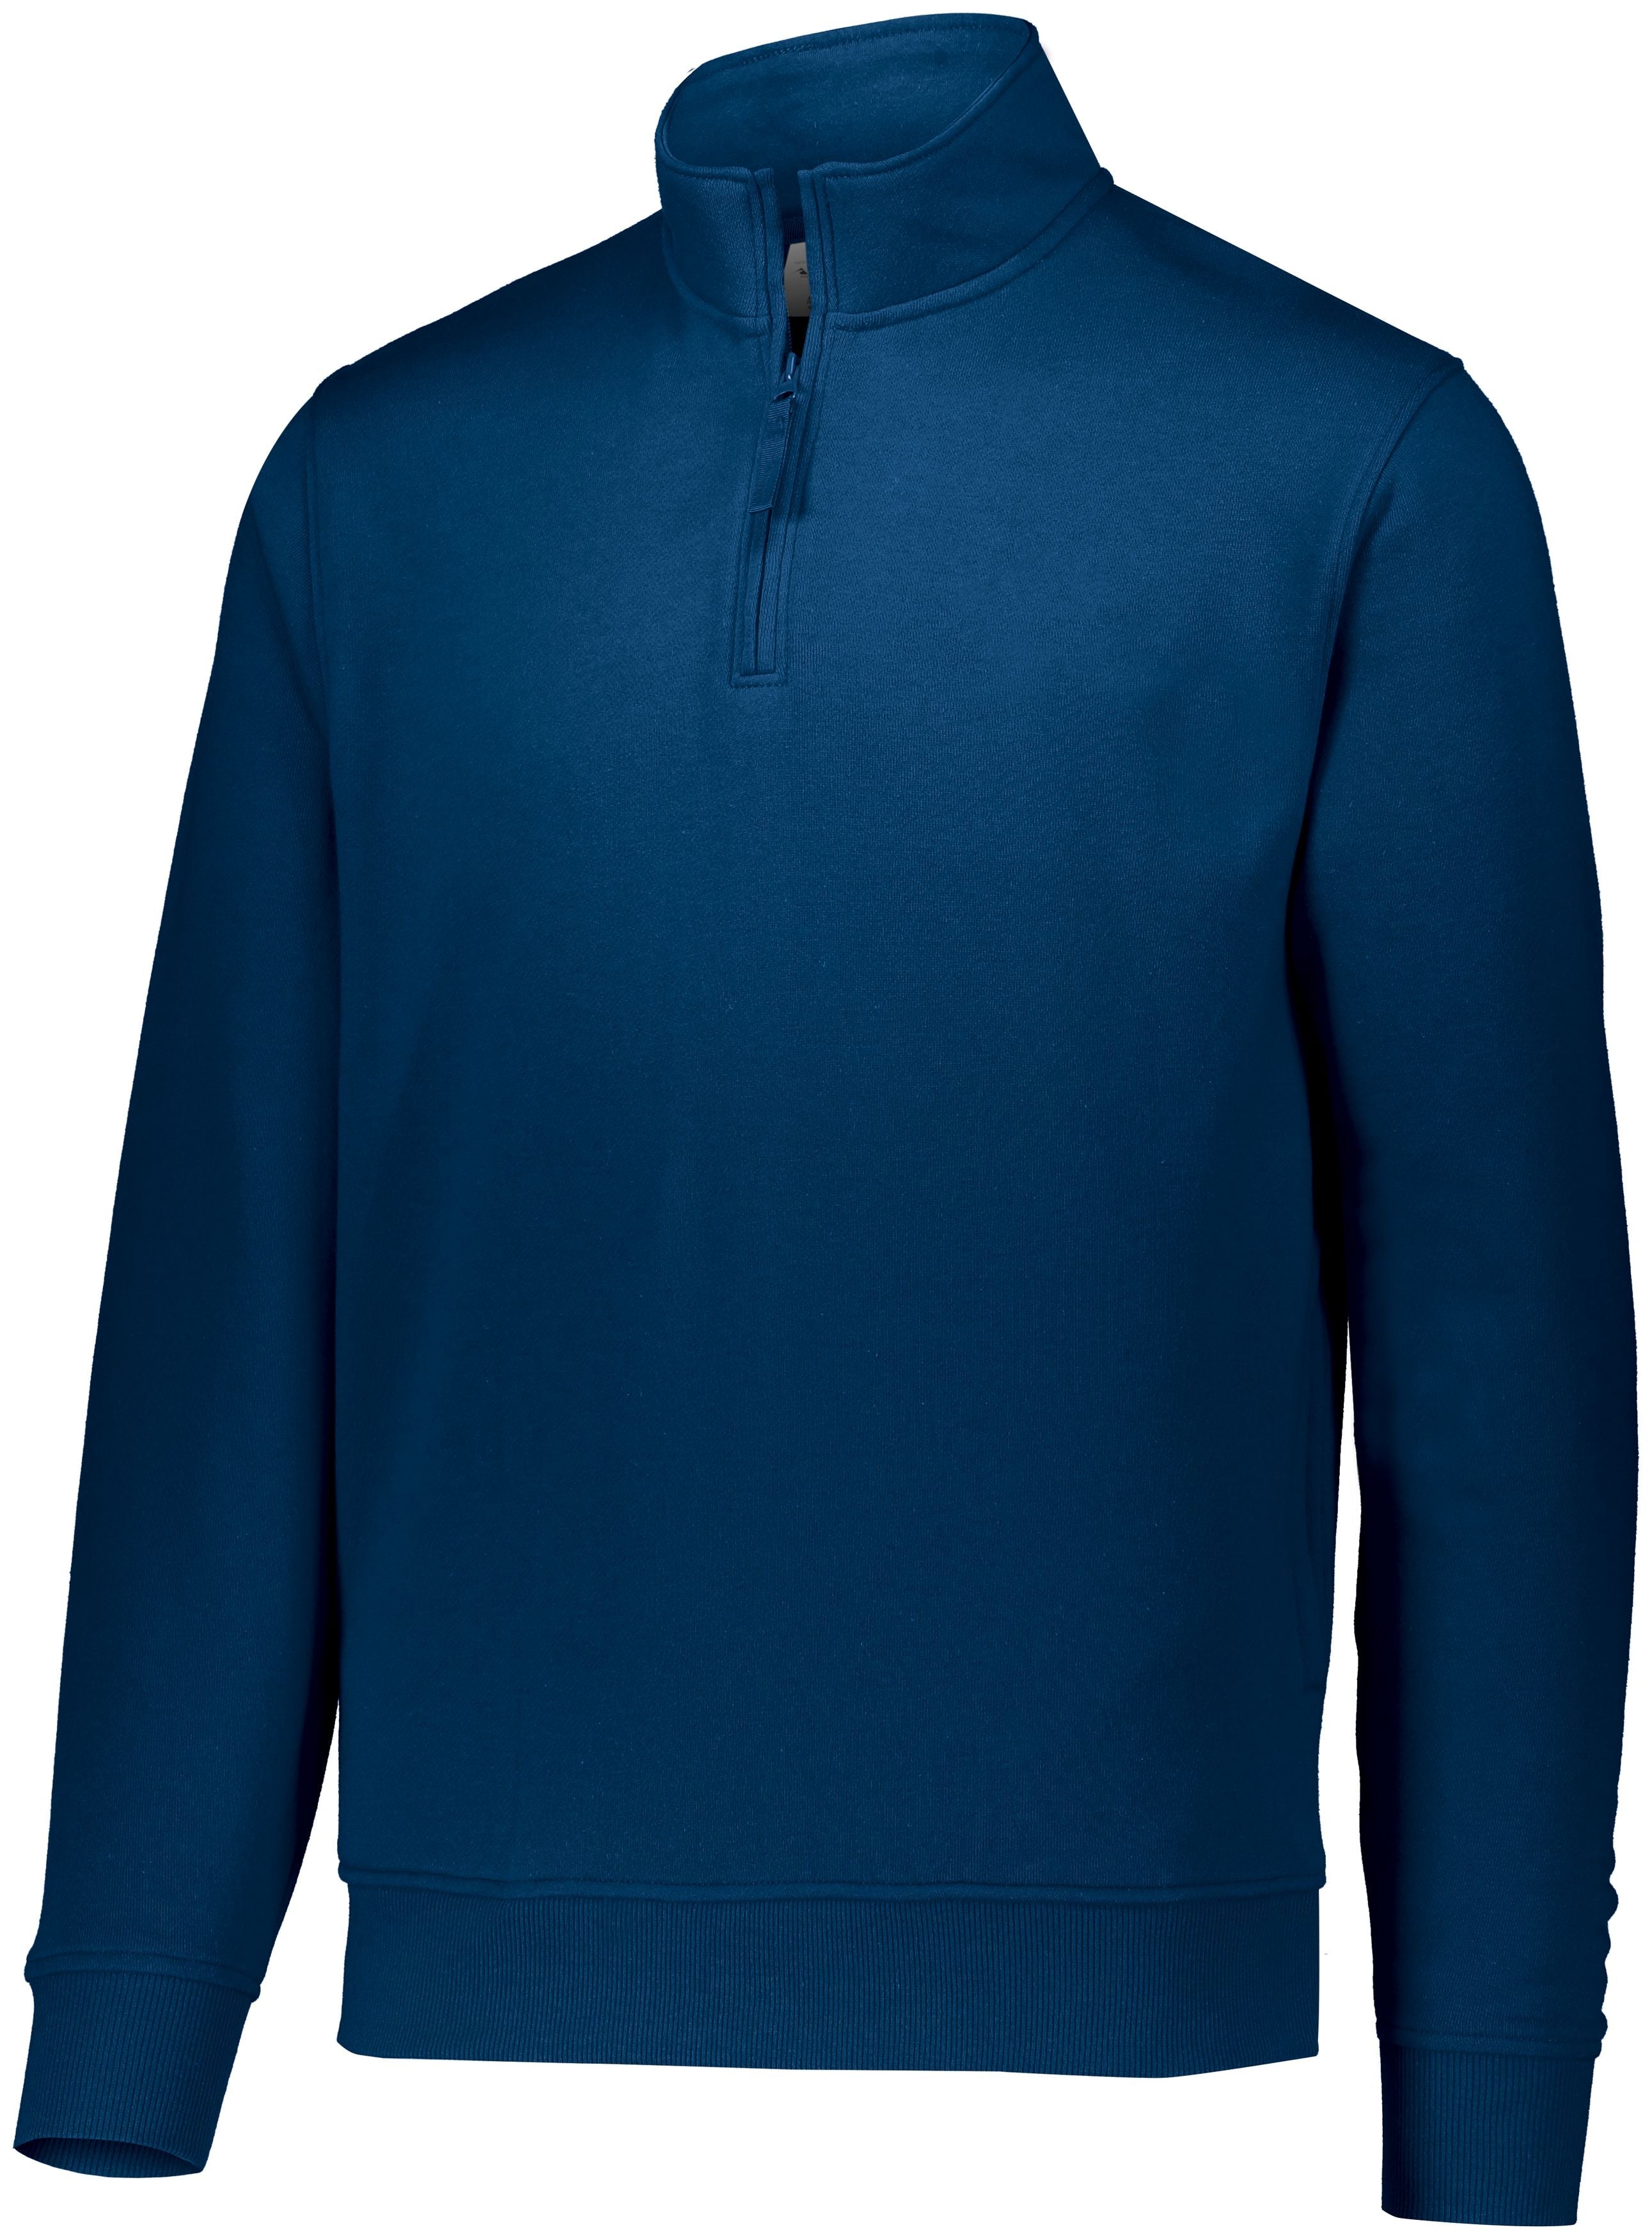 Augusta Sportswear 60/40 Fleece Pullover in Navy  -Part of the Adult, Adult-Pullover, Augusta-Products, Outerwear product lines at KanaleyCreations.com